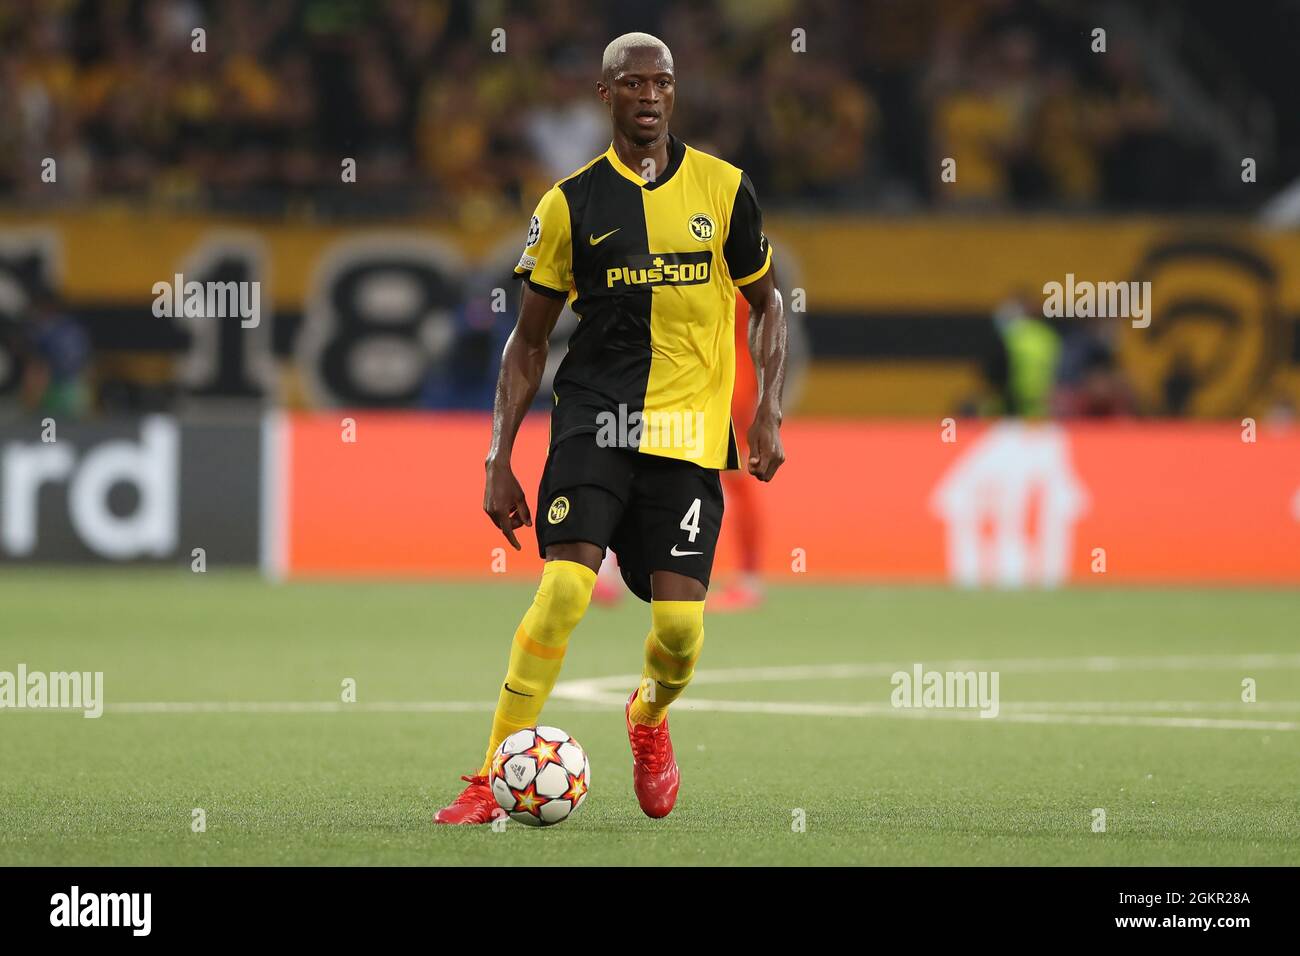 Berne, Switzerland, 14th September 2021. Mohamed Ali Camara of Young Boys  during the UEFA Champions League match at Stadion Wankdorf, Berne. Picture  credit should read: Jonathan Moscrop / Sportimage Stock Photo - Alamy